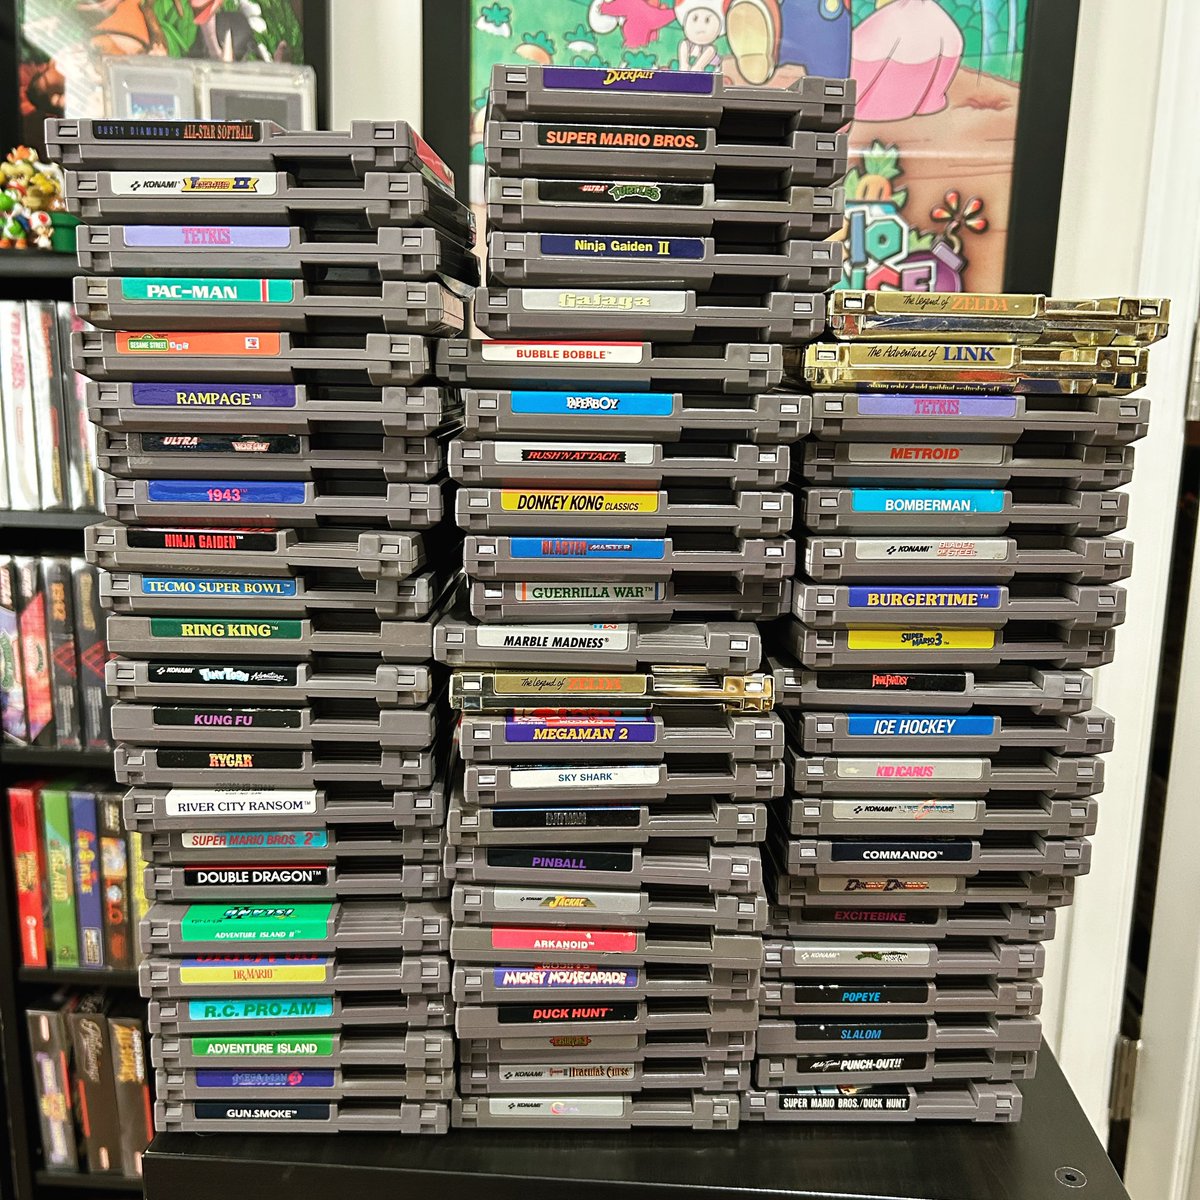 How does one acquire this many games?!?